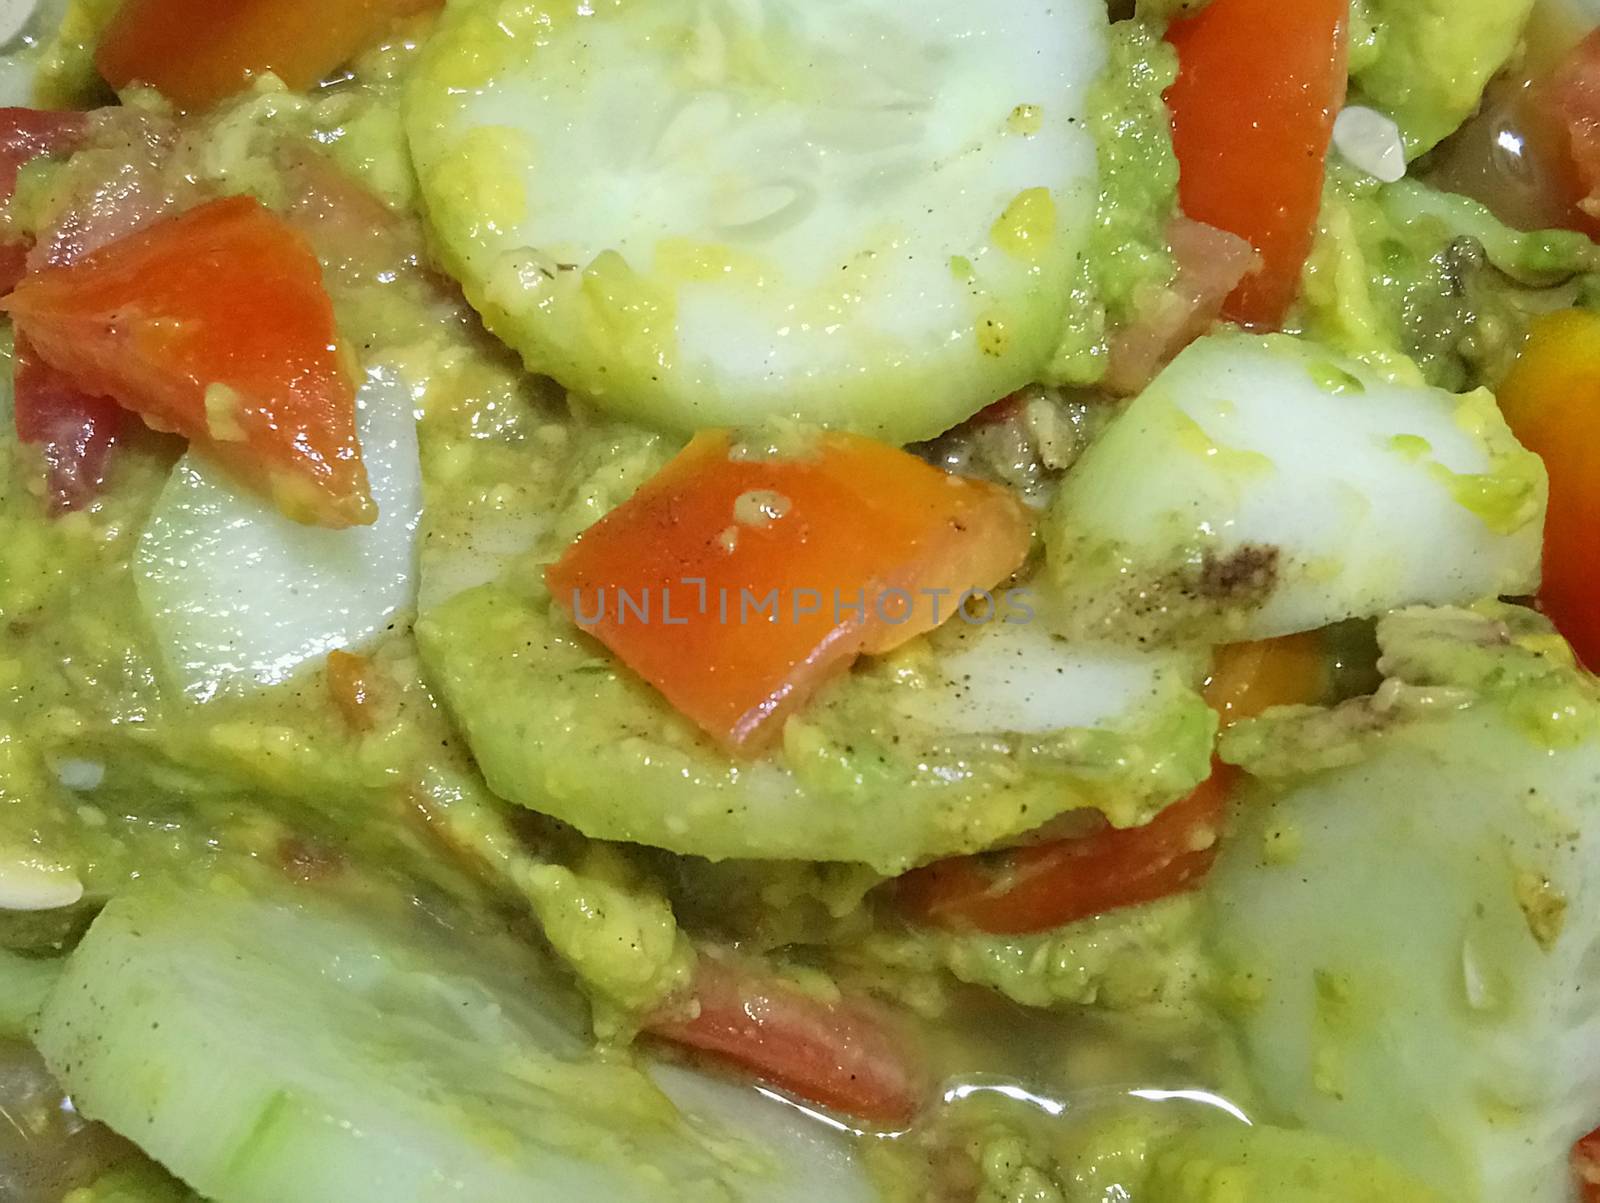 Cucumber with tomato and vinegar vegetable salad mix serve in household